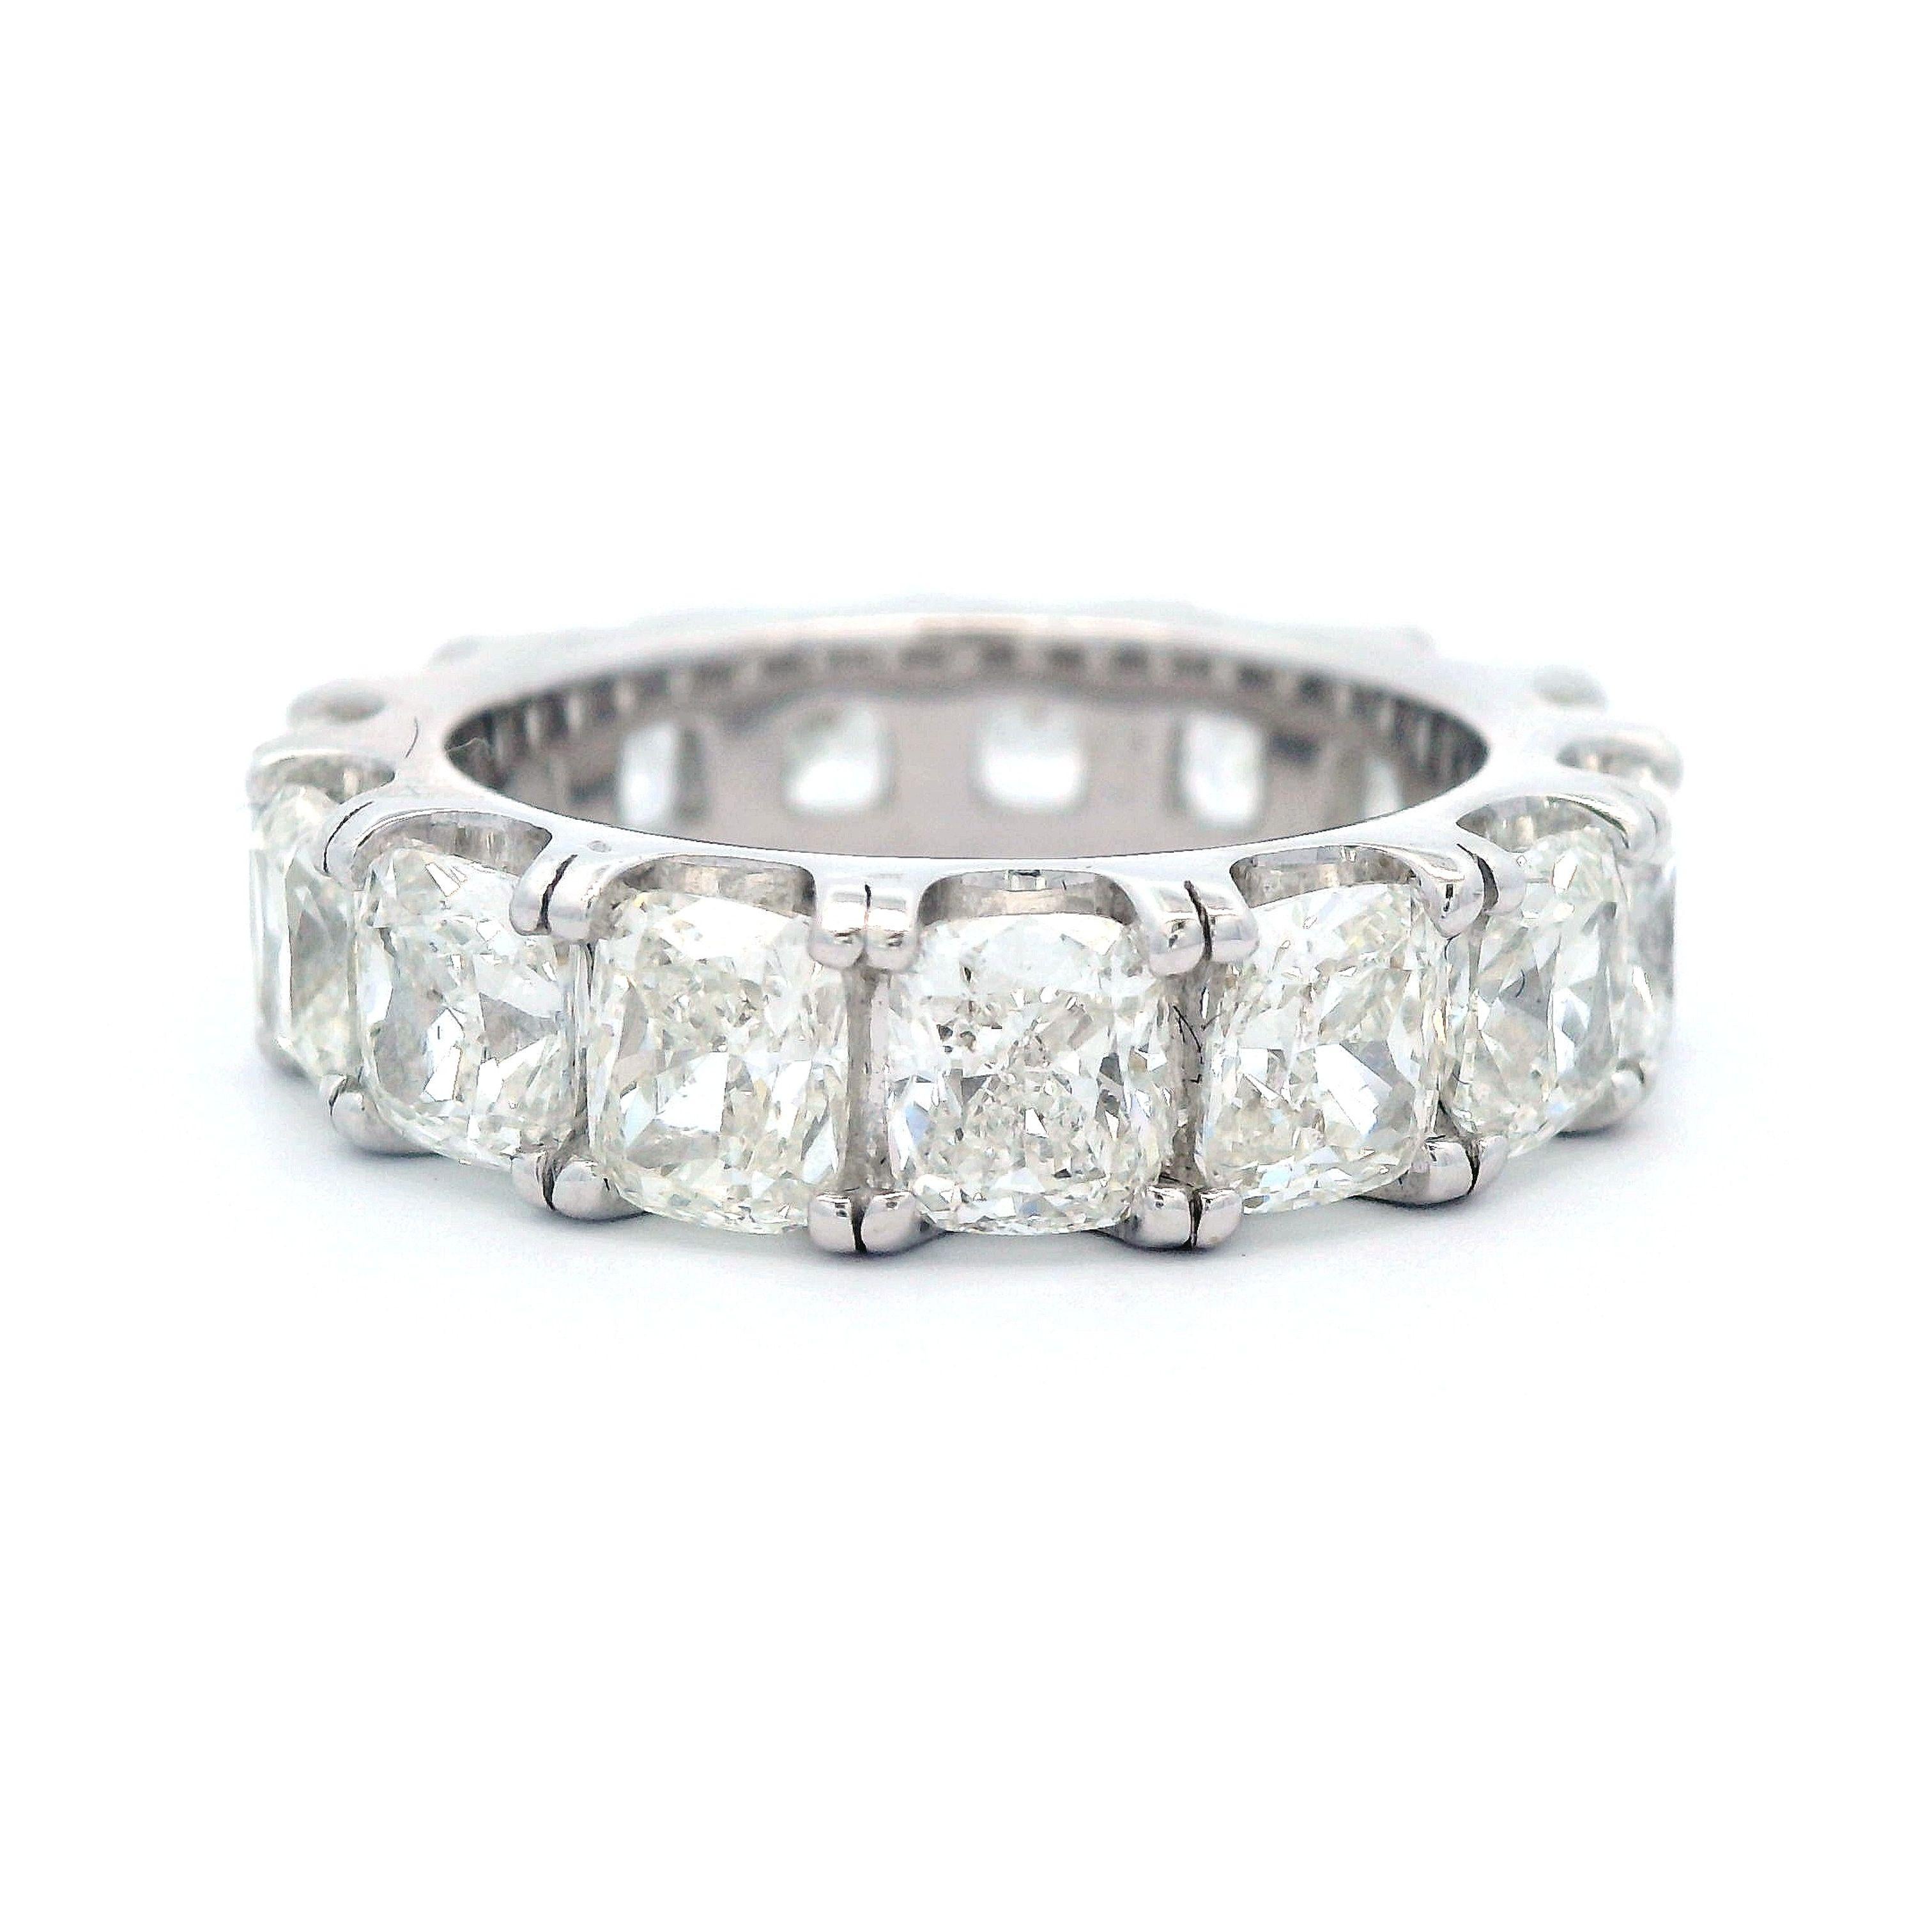 Stunning cushion cut diamond eternity band, By Alexander Beverly Hills.
15 cushion cut diamonds, 7.68 carats. G/I color and VS2/SI1 clarity. 18-karat white gold, 7.96 grams, size 6.5. 
Accommodated with an up to date digital appraisal by a GIA G.G.,